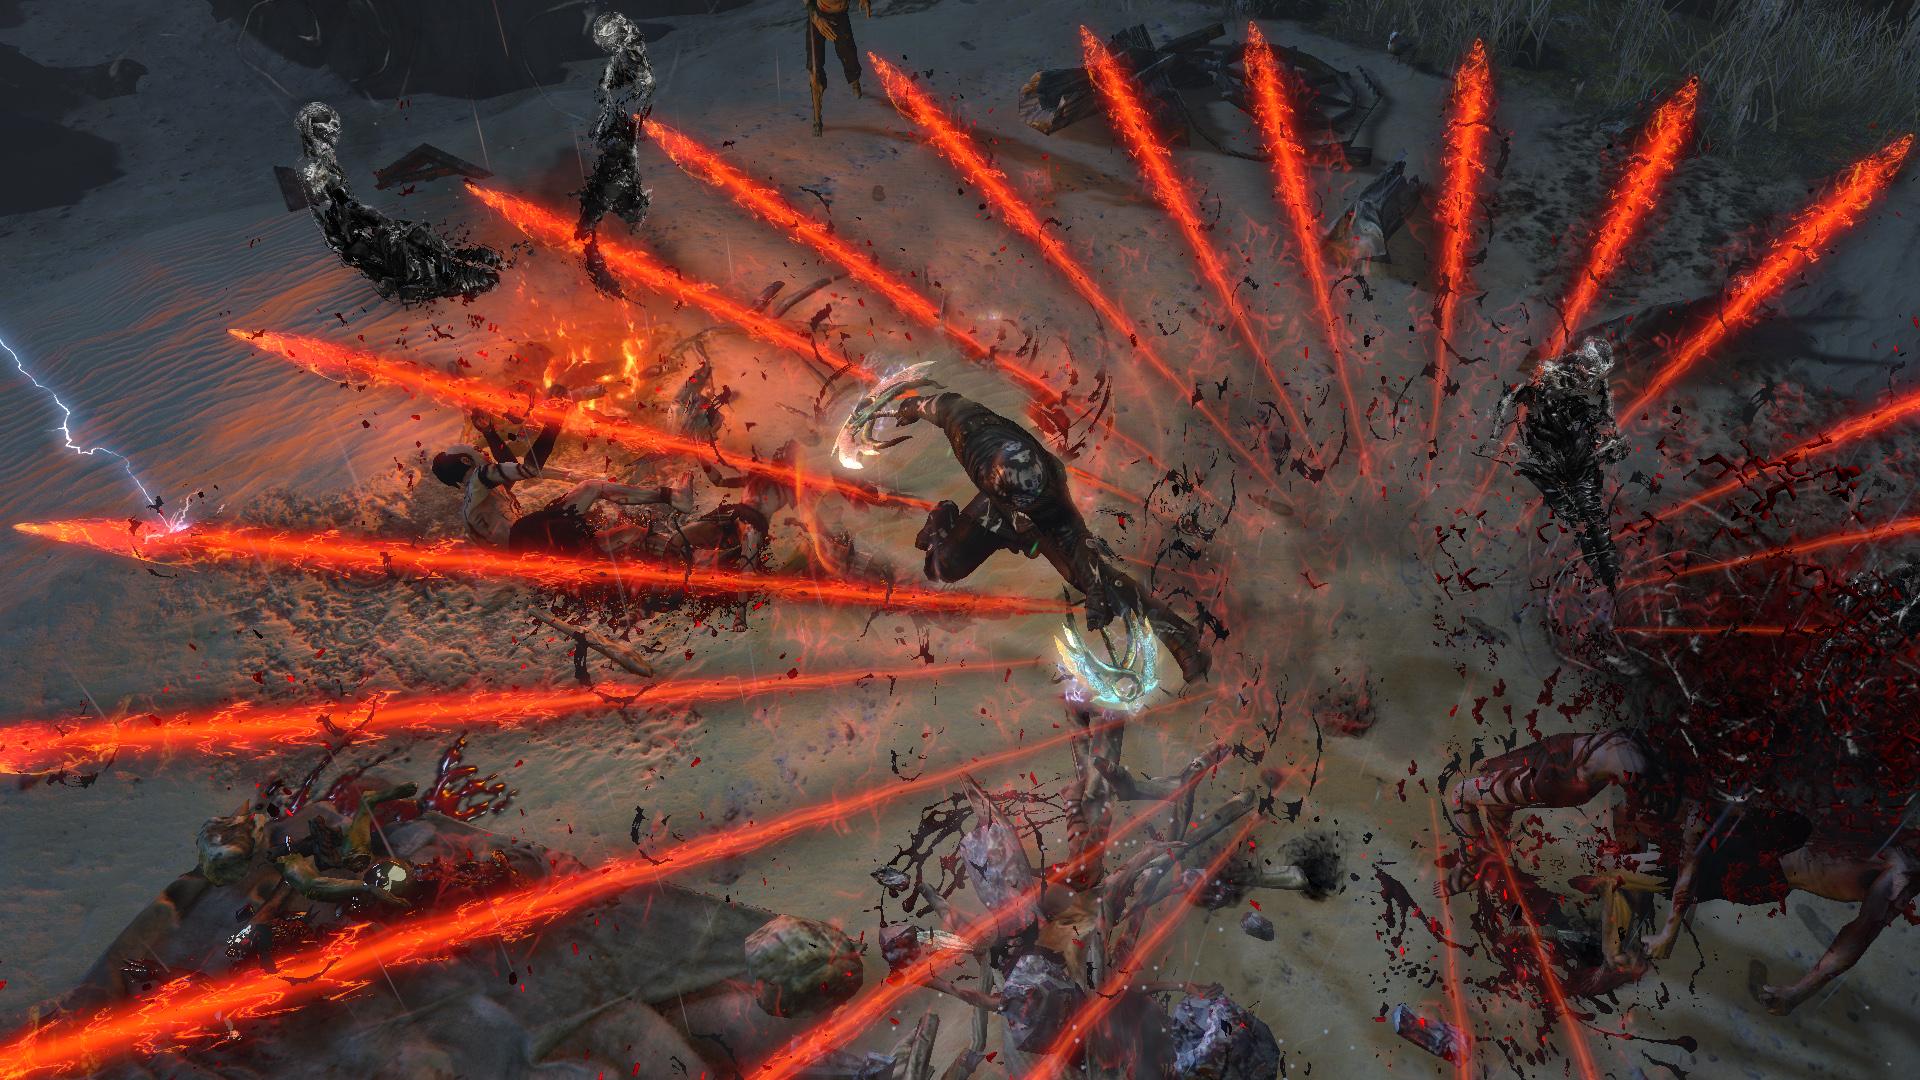 Screenshot №37 from game Path of Exile